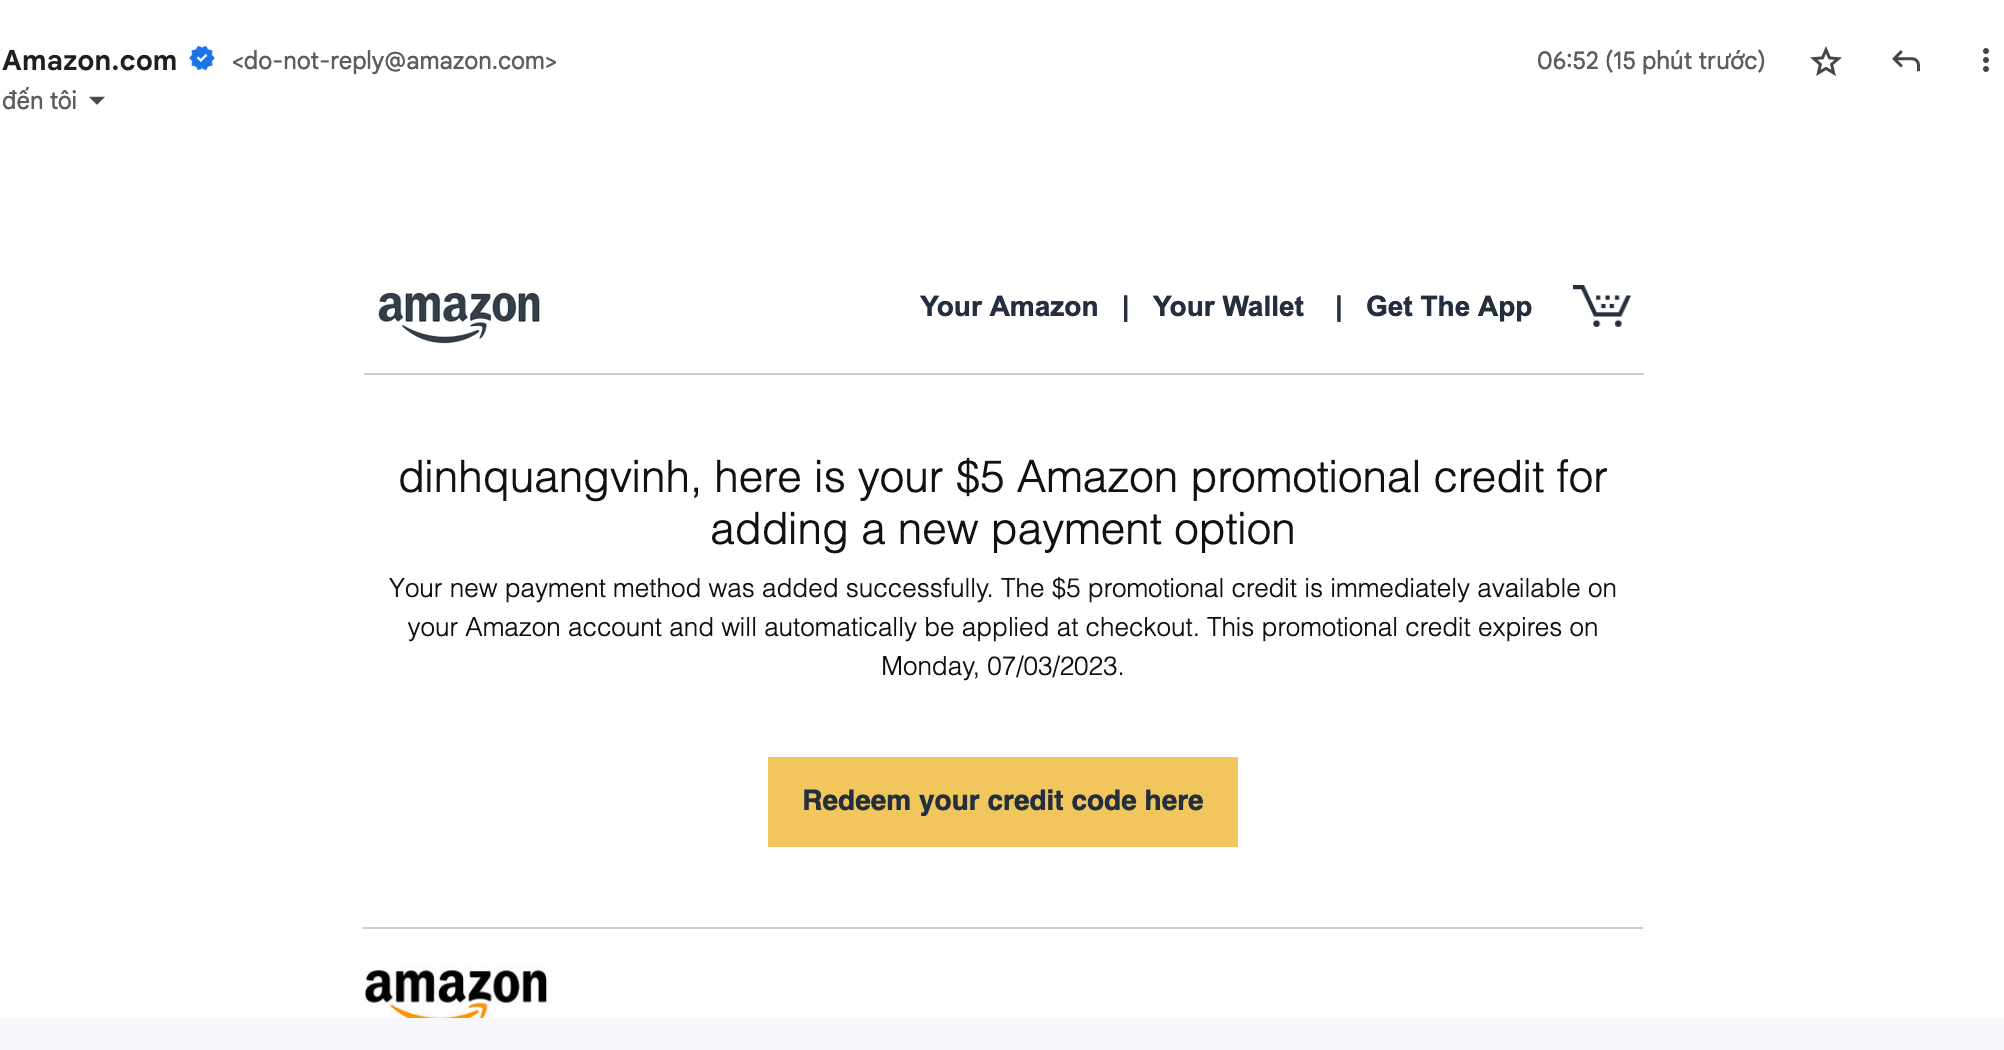 Screenshot-2023-06-04-at-07-08-16-dinhquangvinh-here-is-your-5-Amazon-promotional-credit-for-adding-a-new-payment-option---dinhquangvinh1982gmail.com---Gmail.png